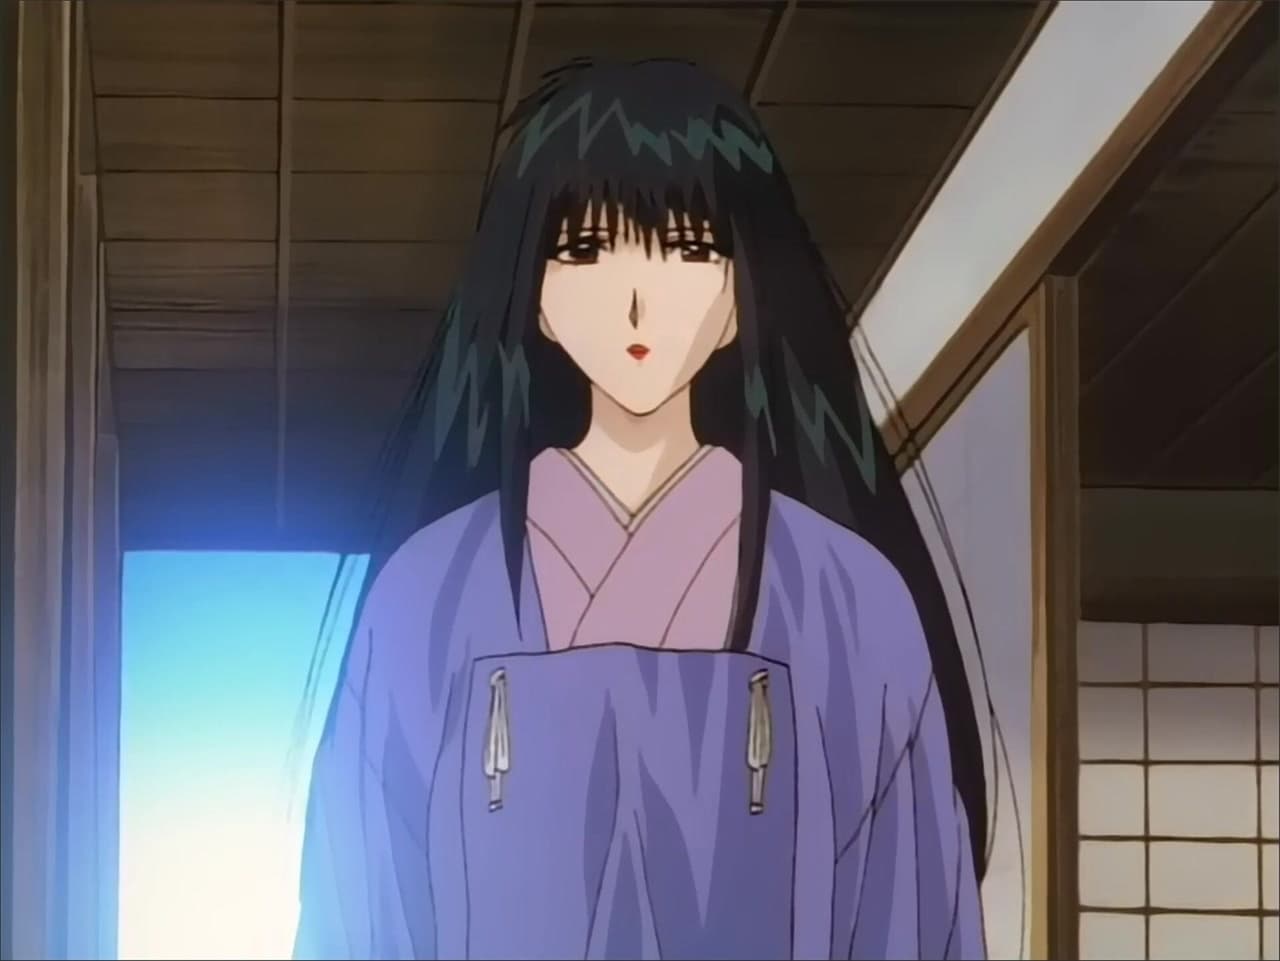 Rurouni Kenshin - Season 1 Episode 14 : To Save a Small Life Lady Doctor Megumi to the Rescue